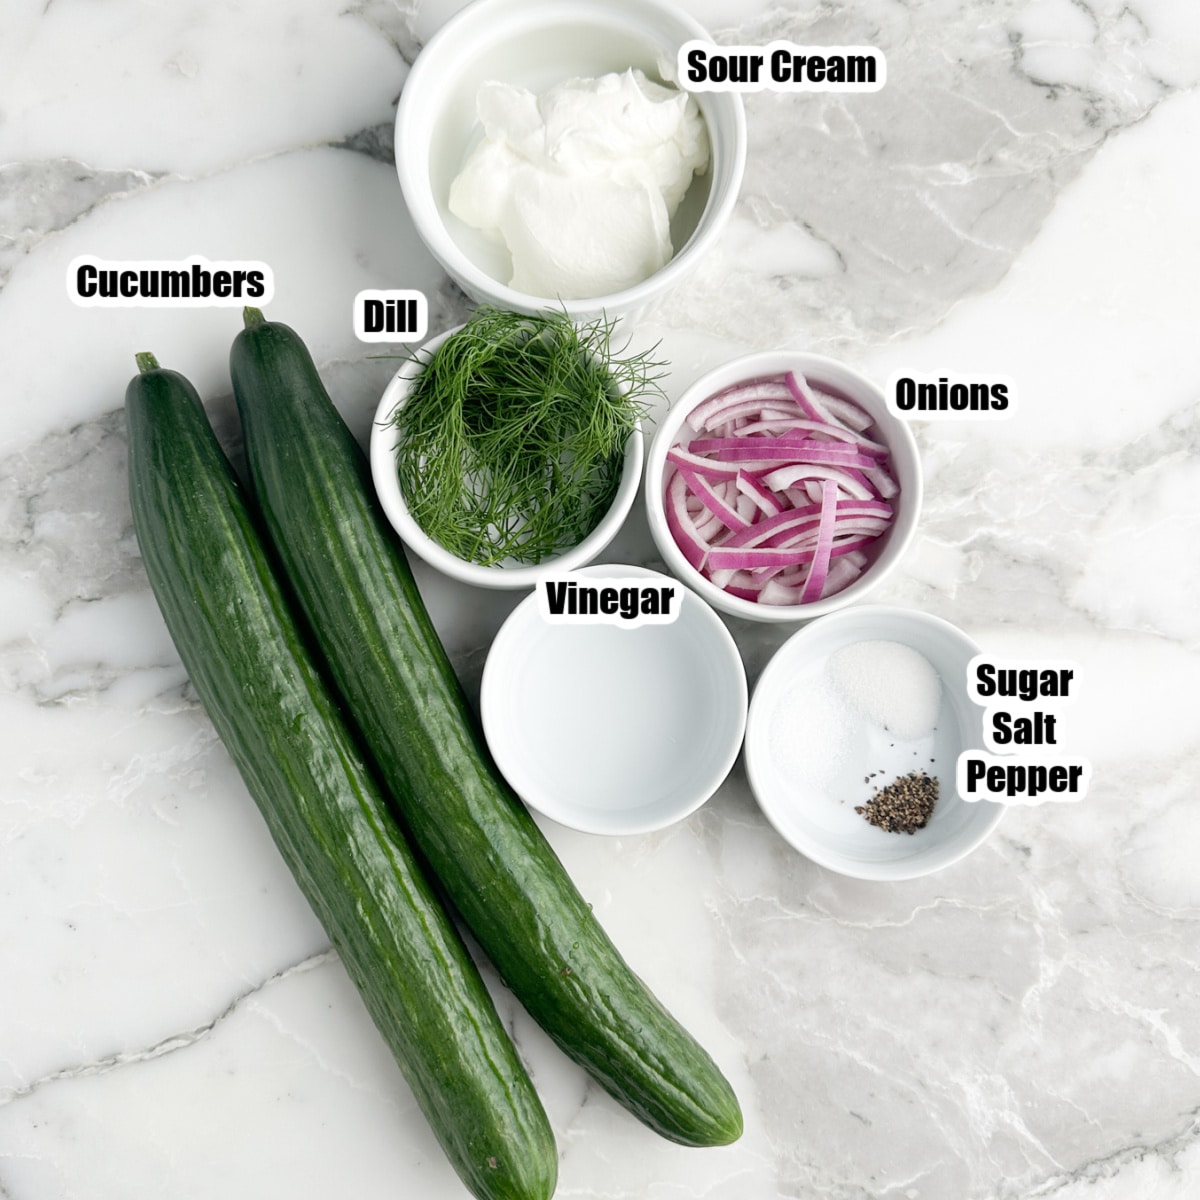 Two cucumbers. bowl of sour cream, dill, onions, vinegar, and seasonings.